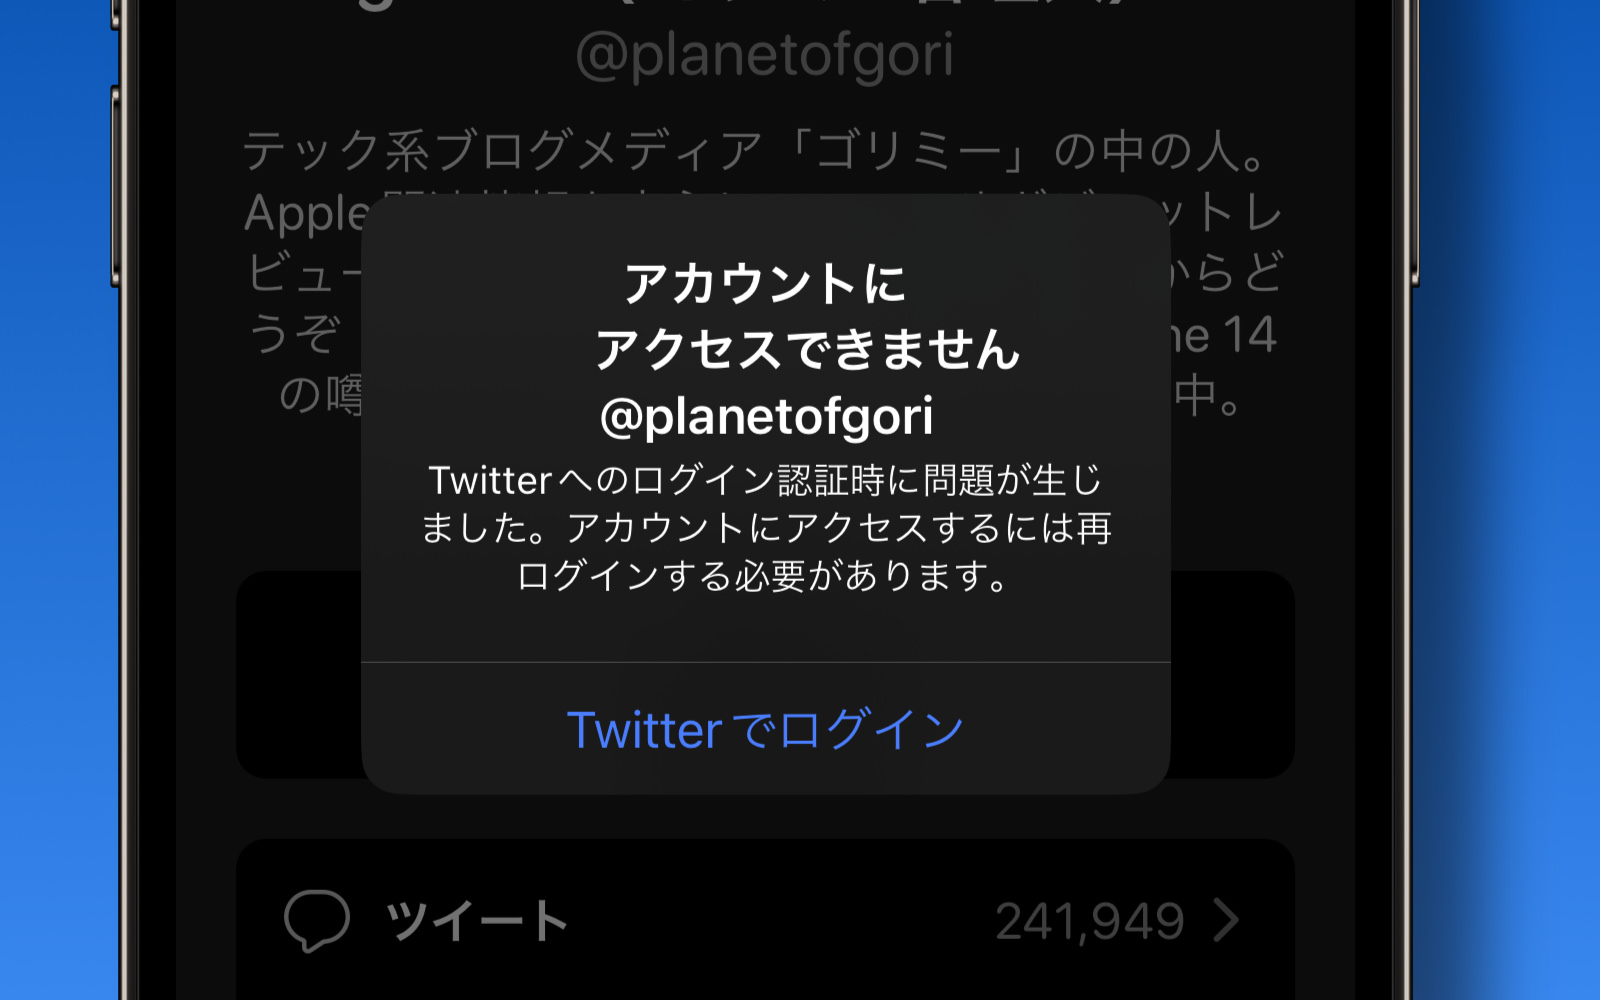 Cannot use tweetbot again